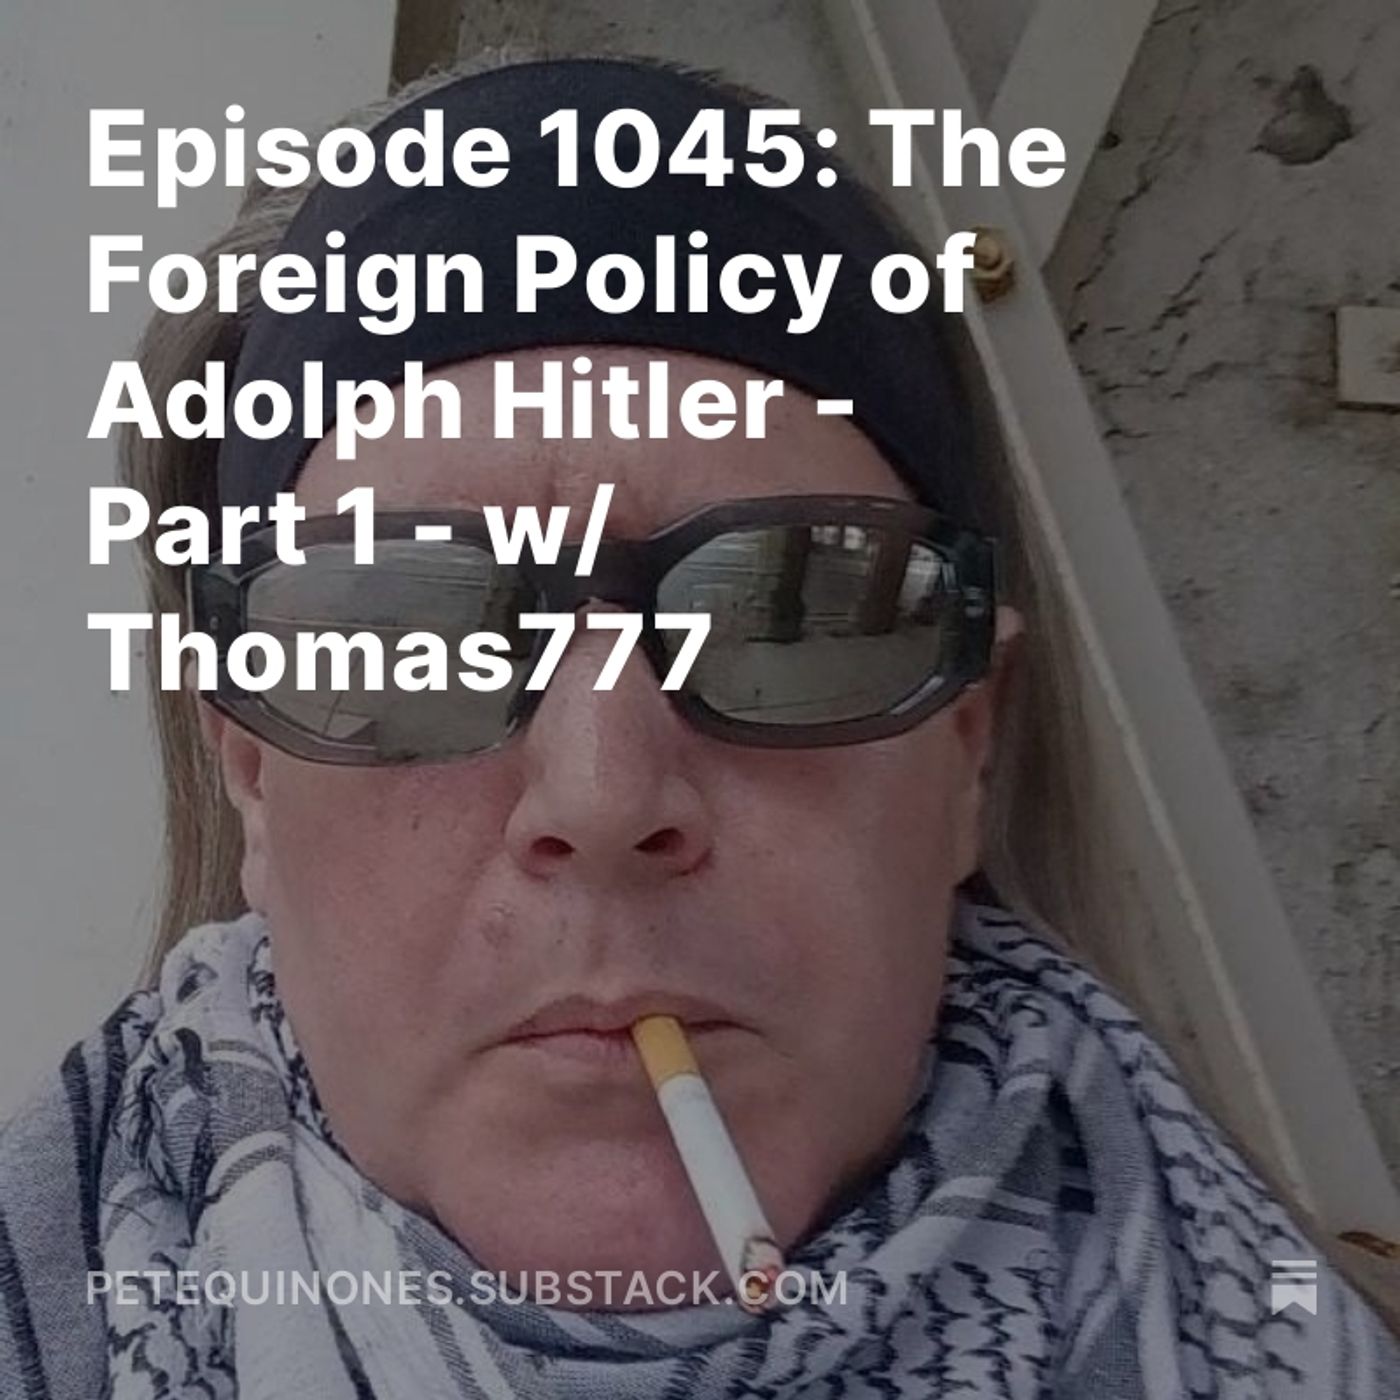 Episode 1045: The Foreign Policy of Adolph Hitler - Part 1 - w/ Thomas777